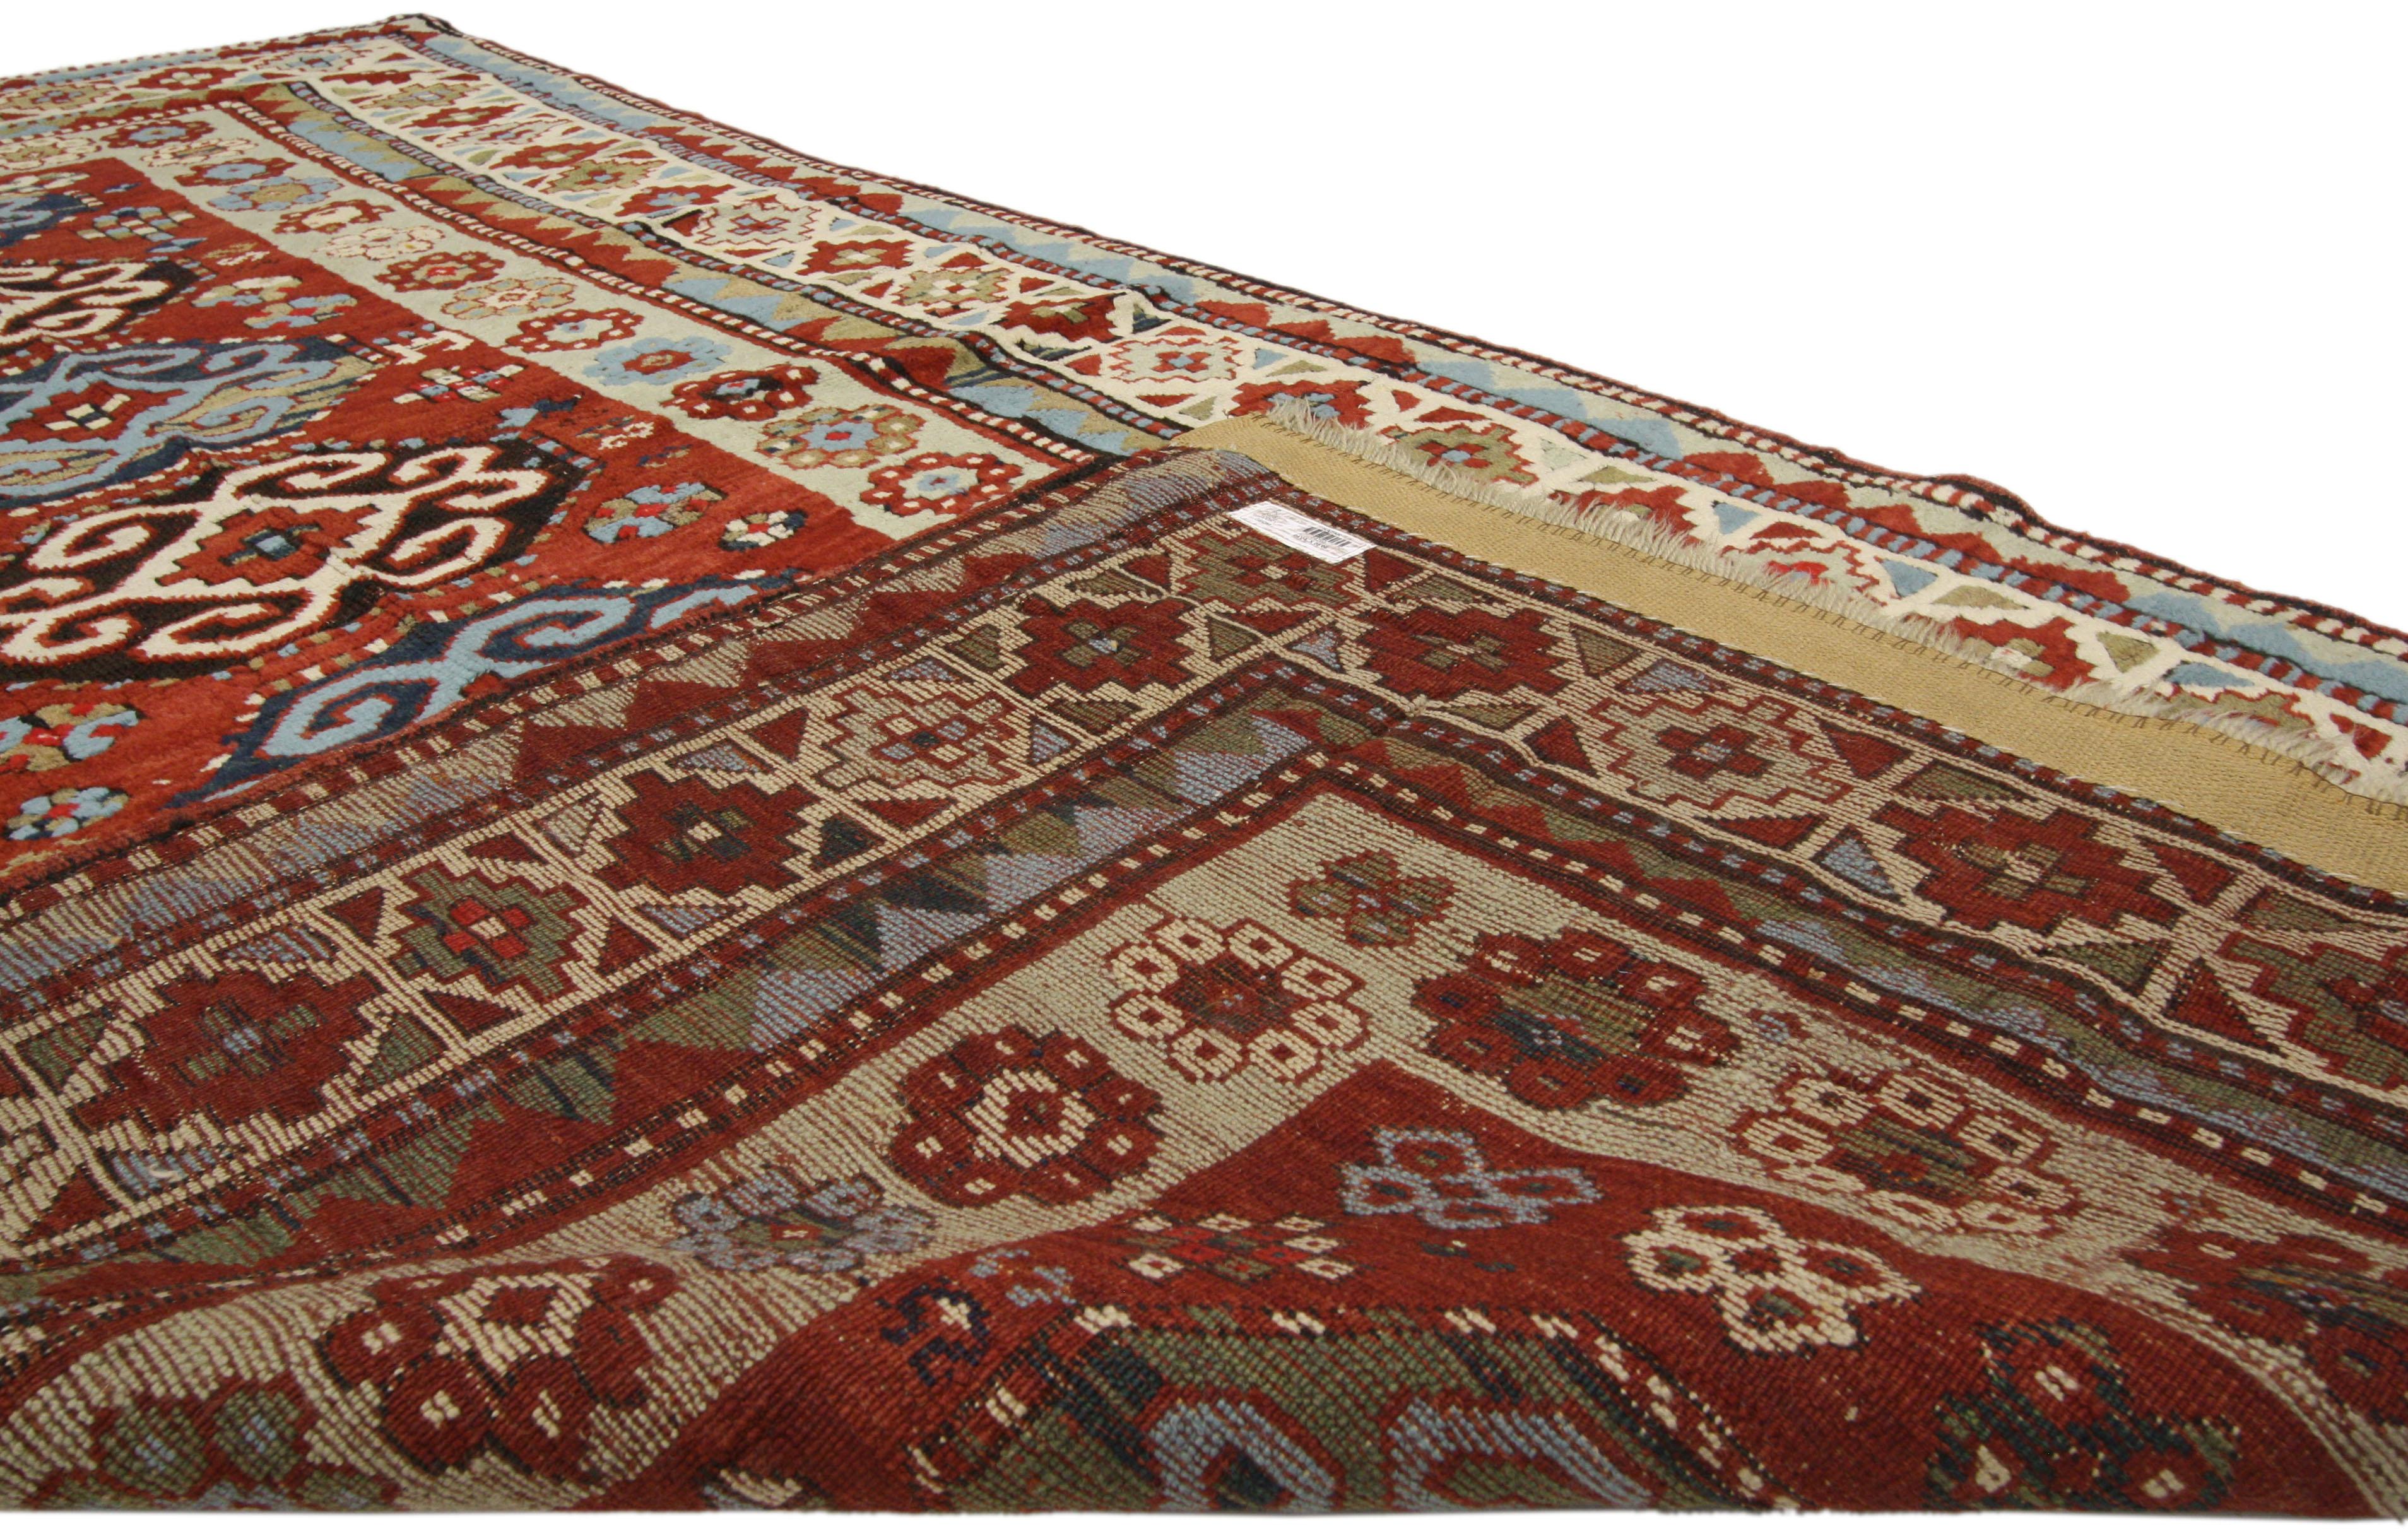 Hand-Knotted Rustic Tribal Style Antique Caucasian Kazak Rug, Wide Hallway Runner